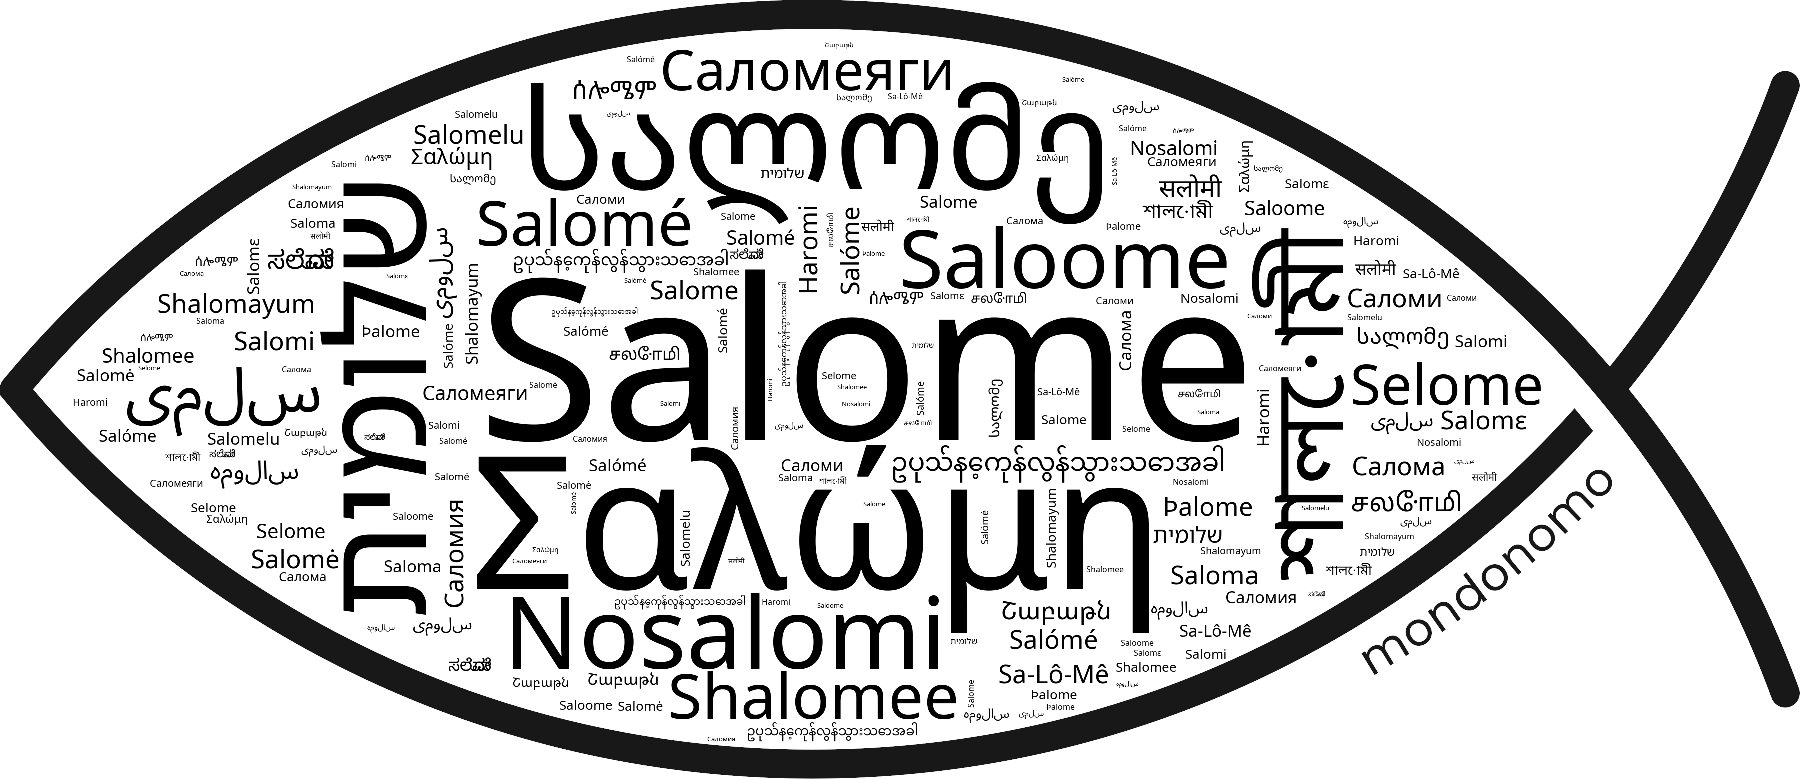 Name Salome in the world's Bibles